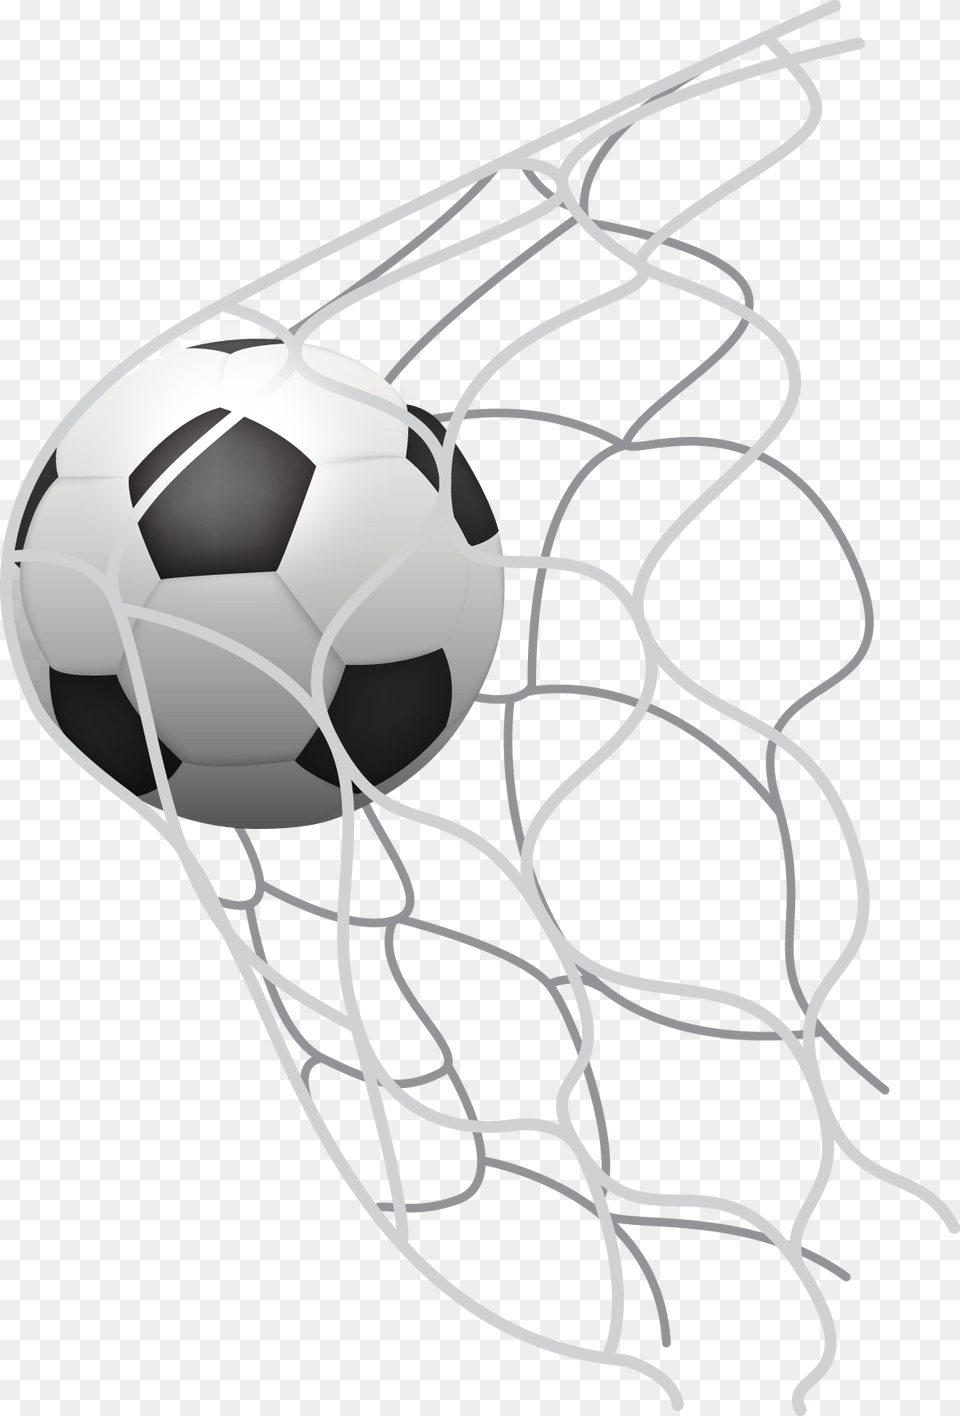 Svg Royalty Stock Drawing At Getdrawings Com Soccer Net, Ball, Football, Soccer Ball, Sport Free Transparent Png